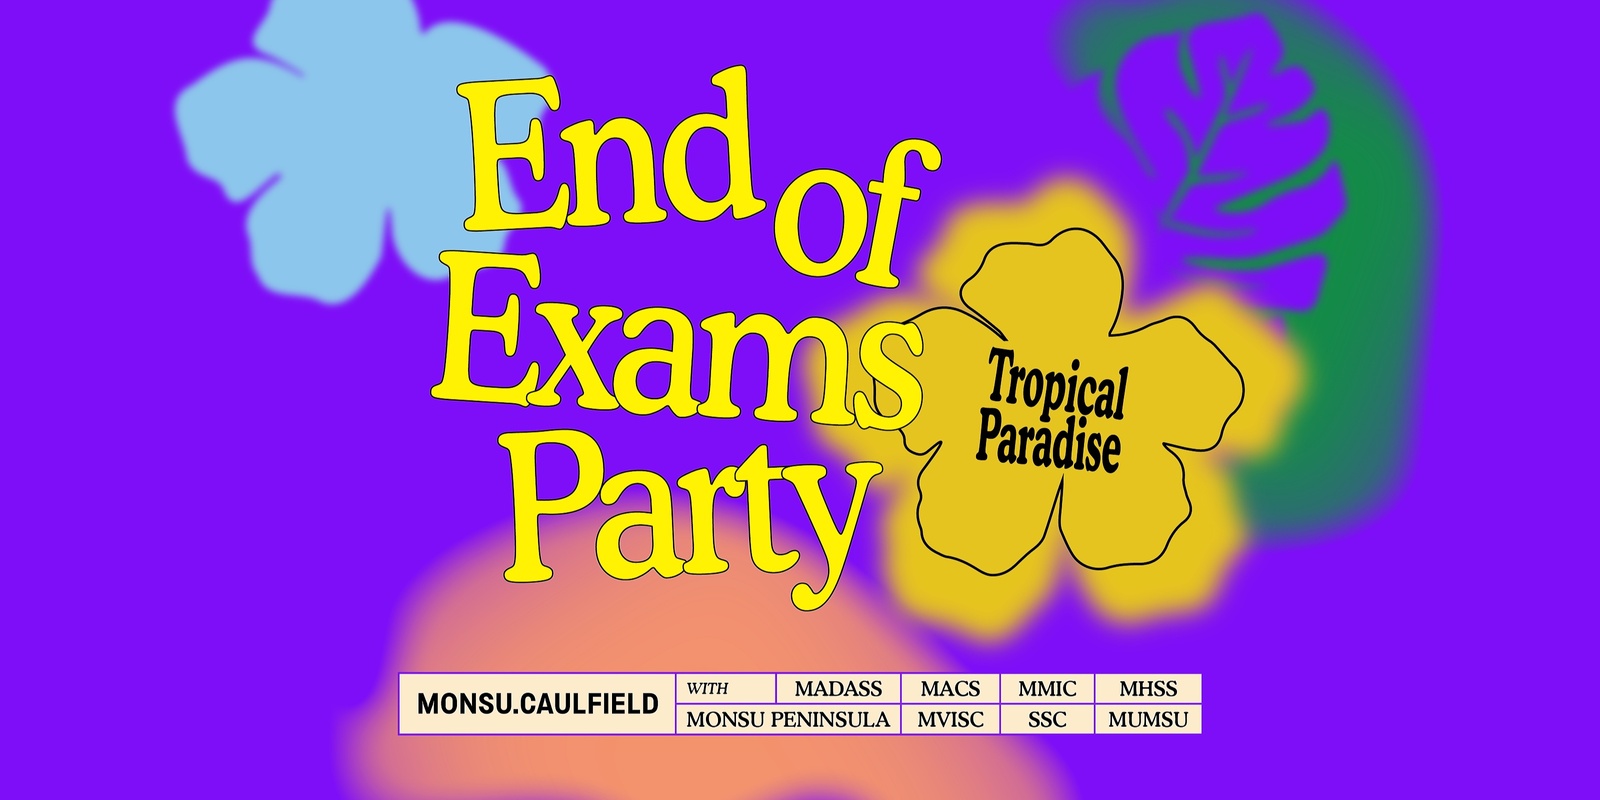 Banner image for End of Exams Party: Tropical Paradise